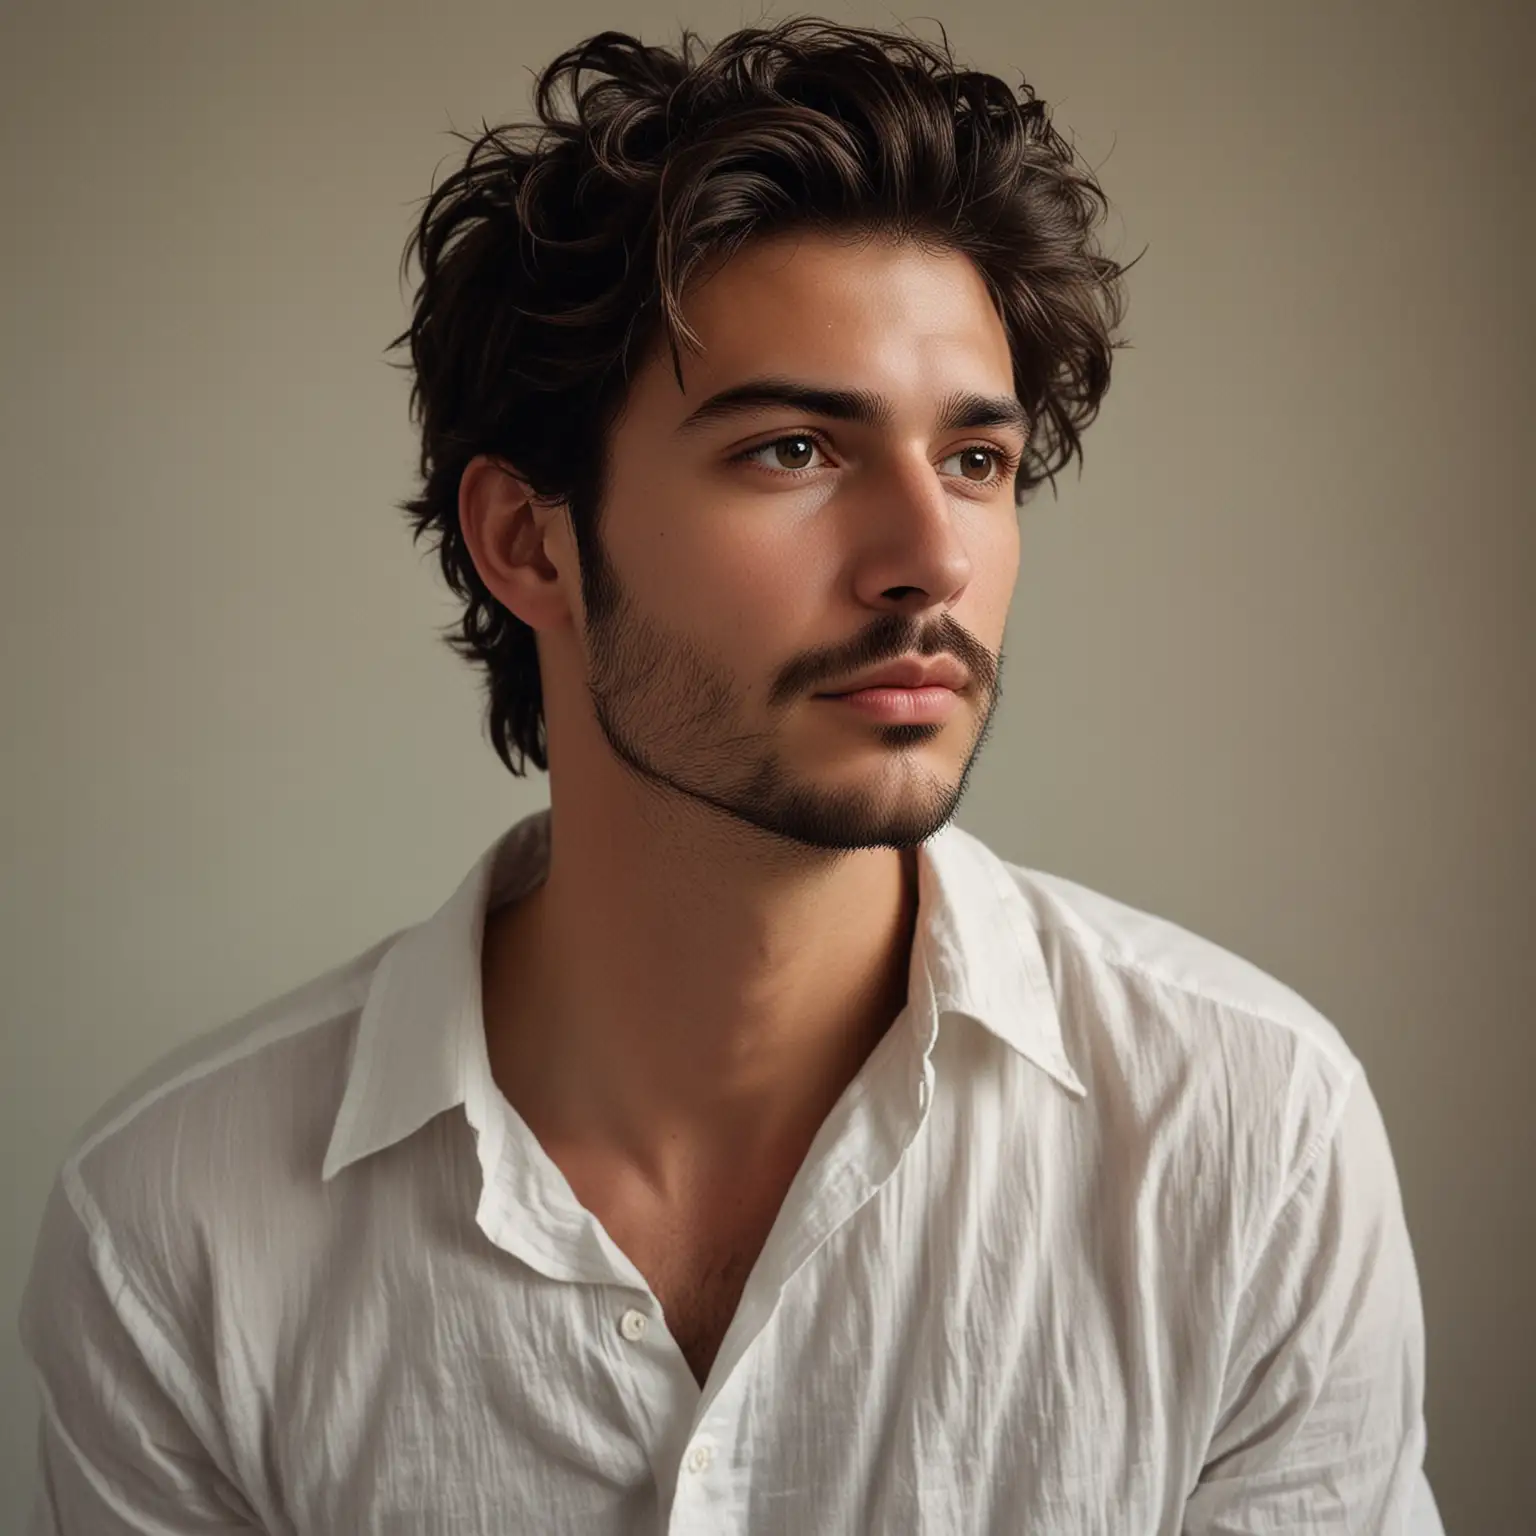 The image portrays a young man with a pensive expression, gazing downward. He has tousled, wavy dark brown hair that frames his face and reaches down to his neck. His facial hair consists of a well-groomed beard and mustache, adding to his rugged yet refined look. He wears a slightly open, white linen shirt, revealing a glimpse of his chest and a small tattoo just below his collarbone. The shirt's texture is light and airy, with subtle vertical stripes. His skin is tanned, suggesting he spends a fair amount of time outdoors.

His posture is relaxed but introspective, with his shoulders slightly hunched and one hand resting on his lap. The background is minimalist and neutral, emphasizing the subject's features and attire. The lighting is soft and natural, casting gentle shadows that enhance the contours of his face and body. This portrait captures a blend of masculinity and sensitivity, exuding a sense of quiet contemplation.